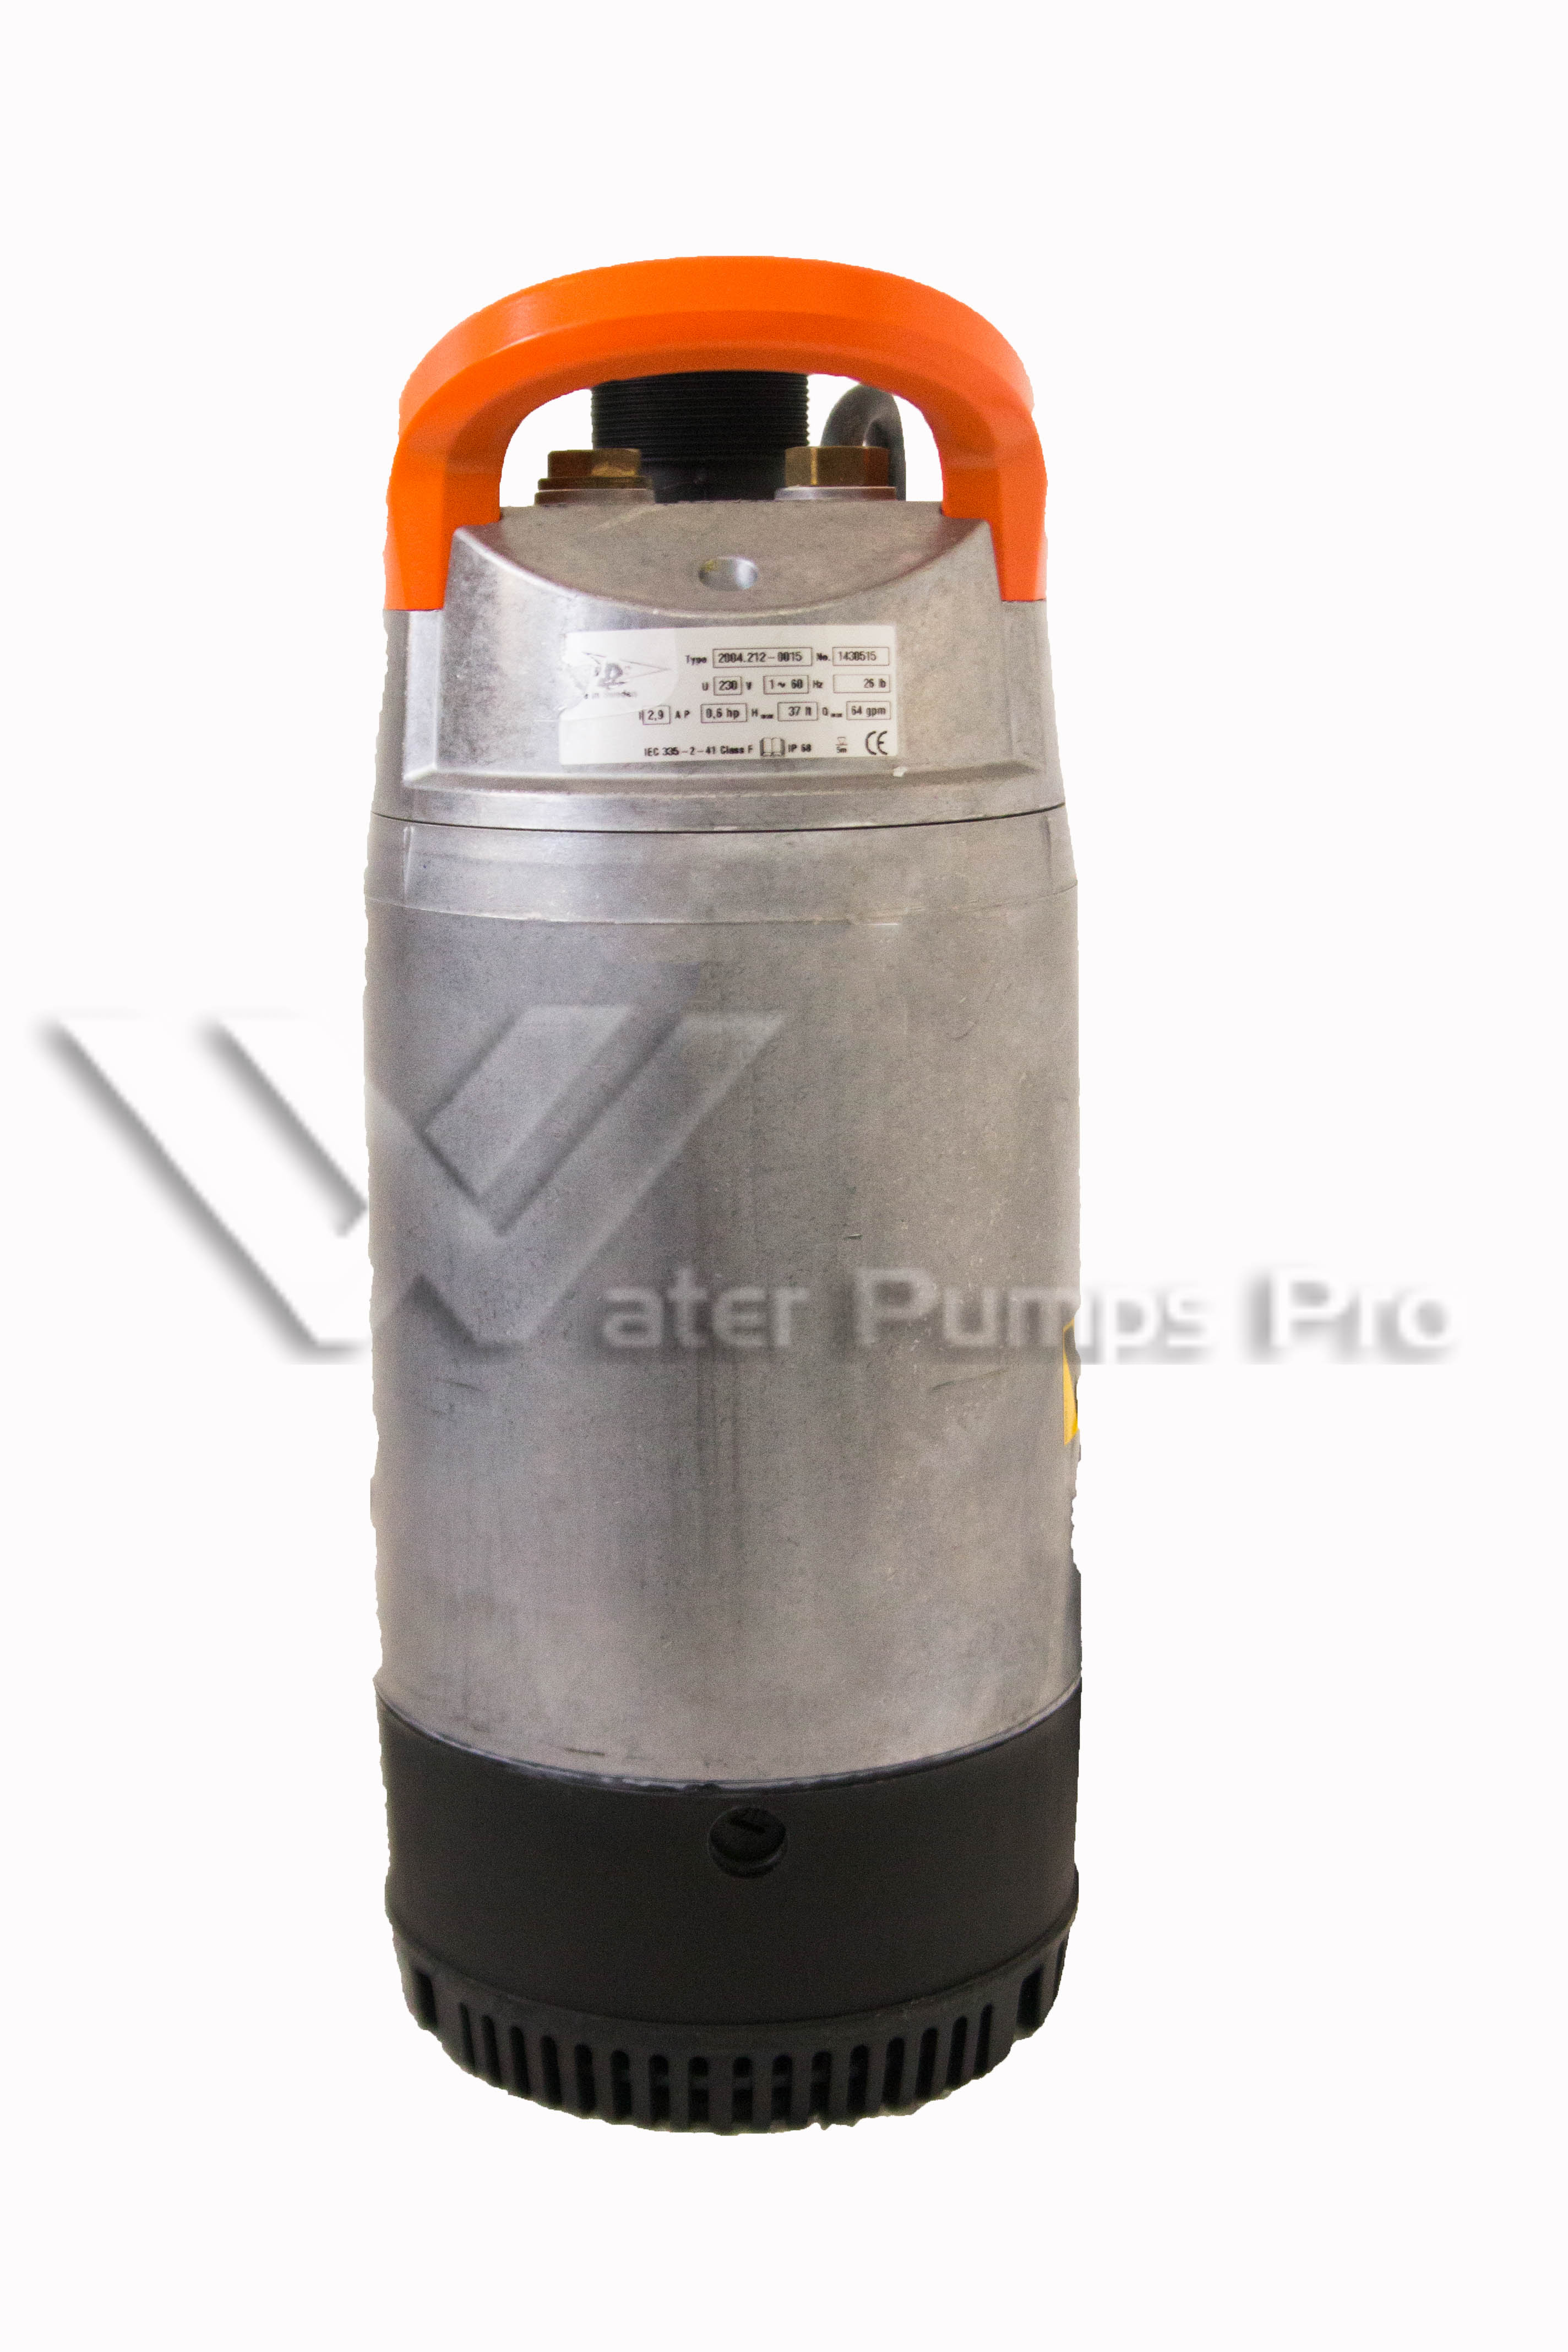 Goulds 2DW0511 Submersible Dewatering Pump 2DW 1/2HP 115V 1PH - Click Image to Close